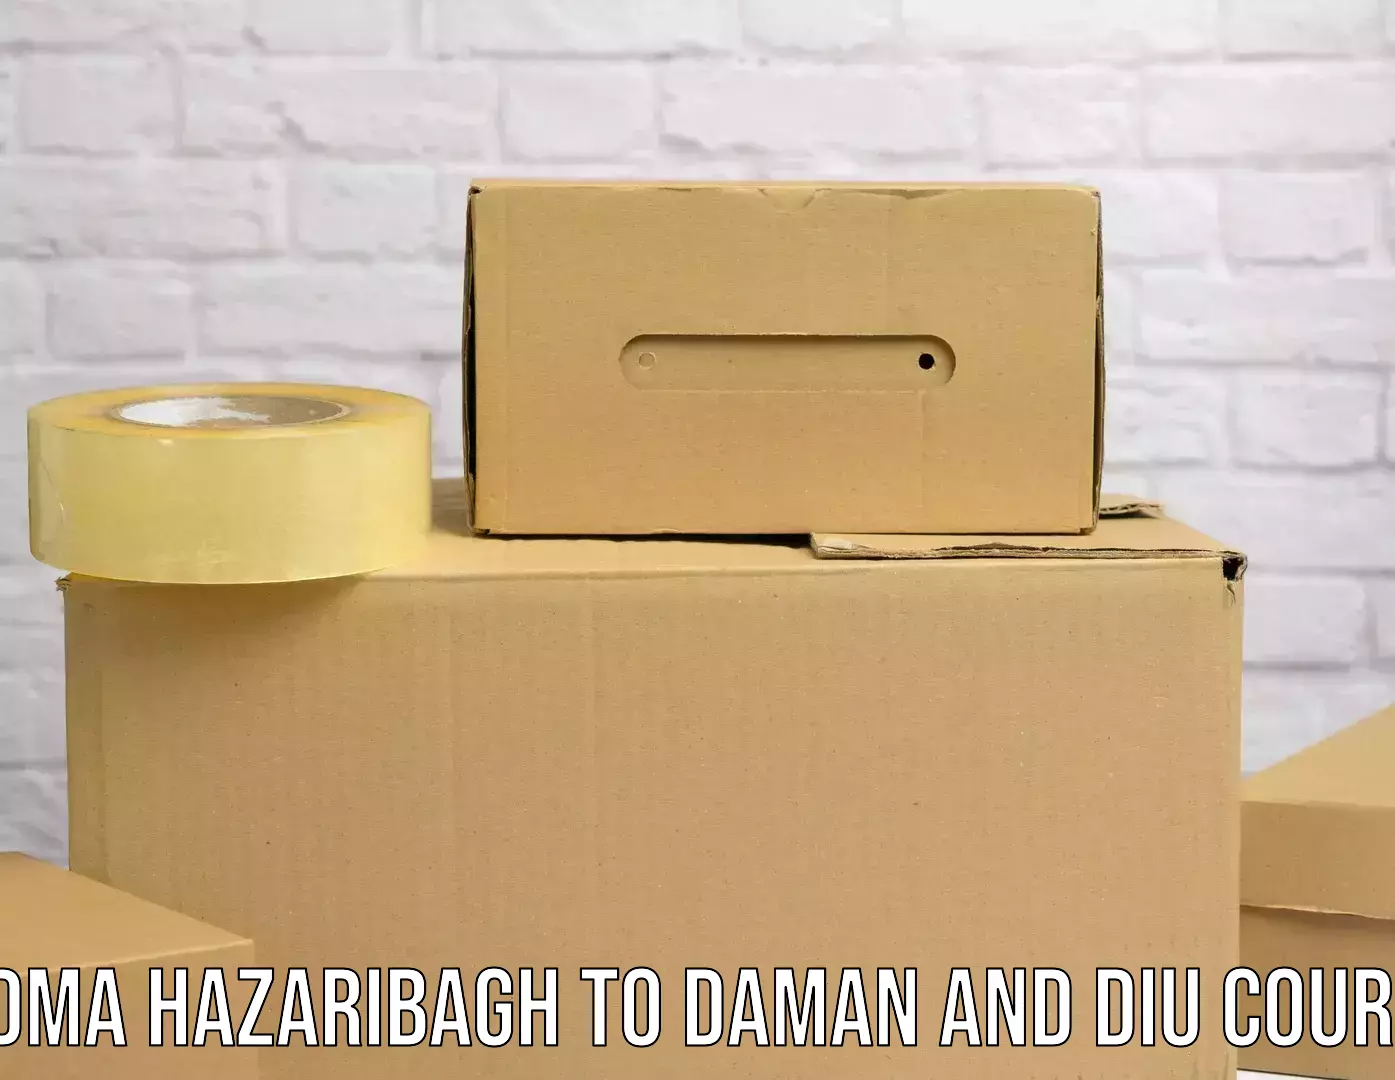 Express package services Padma Hazaribagh to Daman